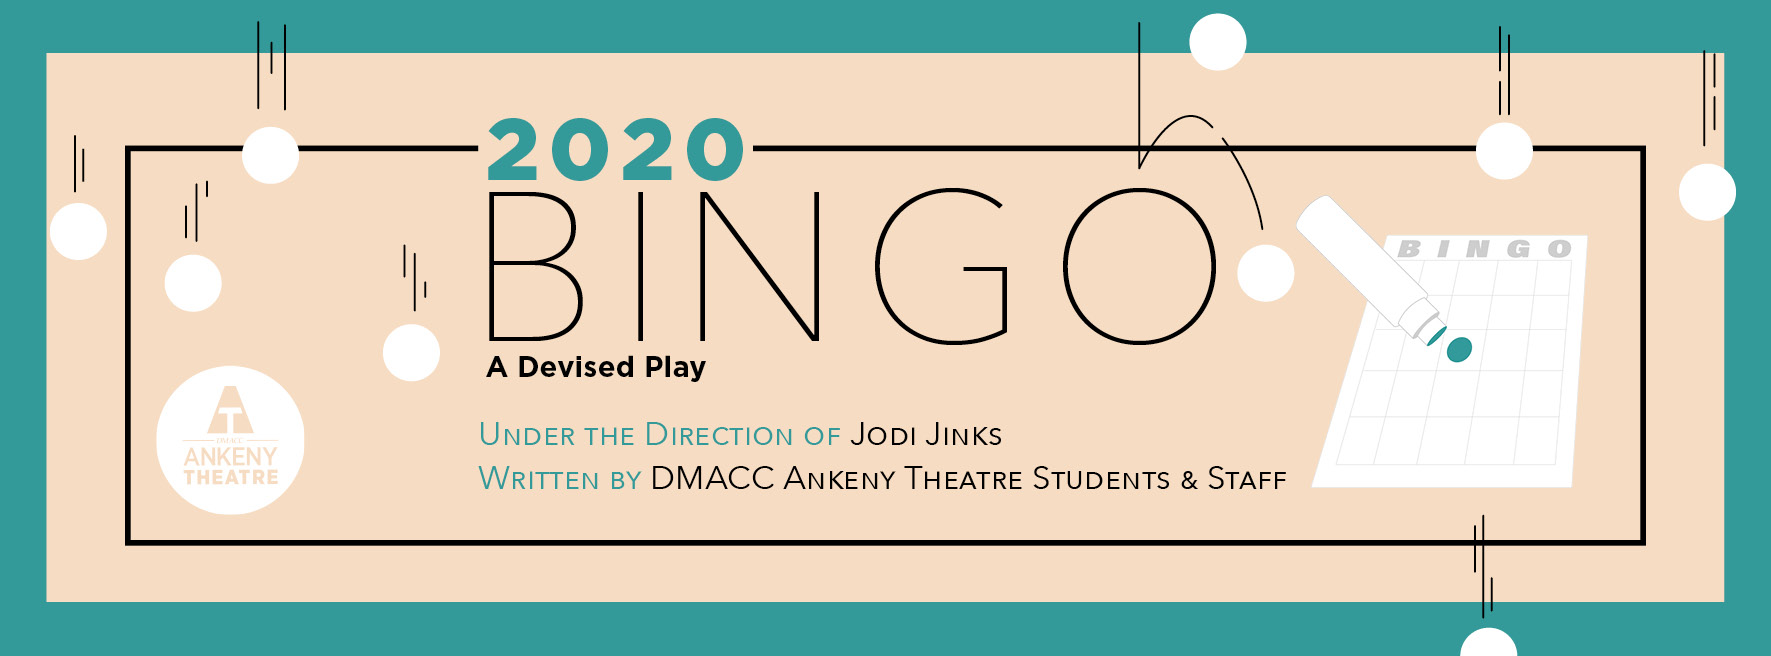 2020 Bingo A devised Play under the direction of Jodi Jinks, Written by DMACC Ankeny Theatre Students & Staff